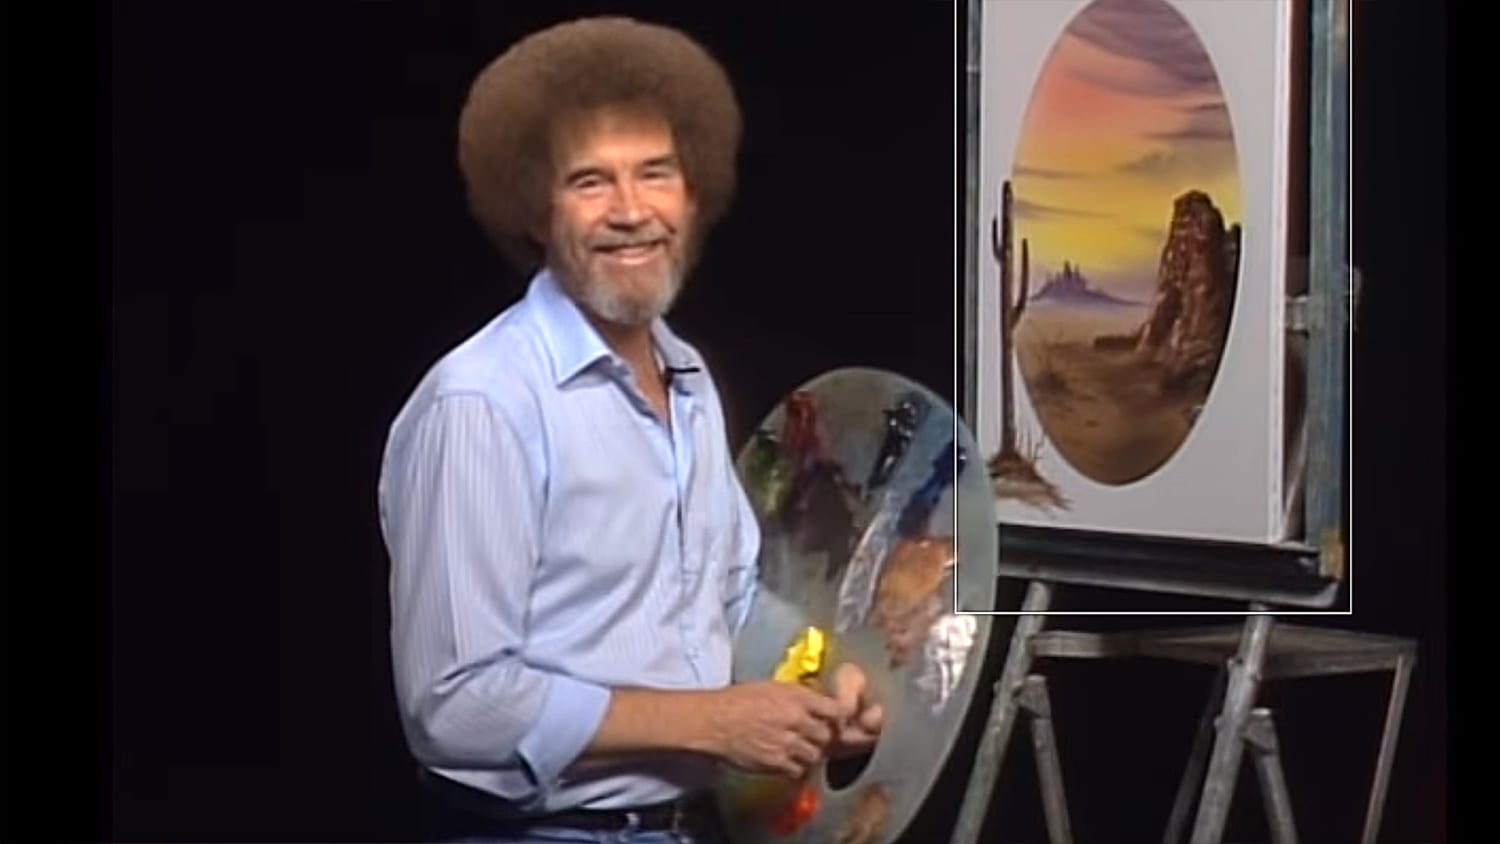 Can you handle the truth? Bob Ross' famous curly hair was actually